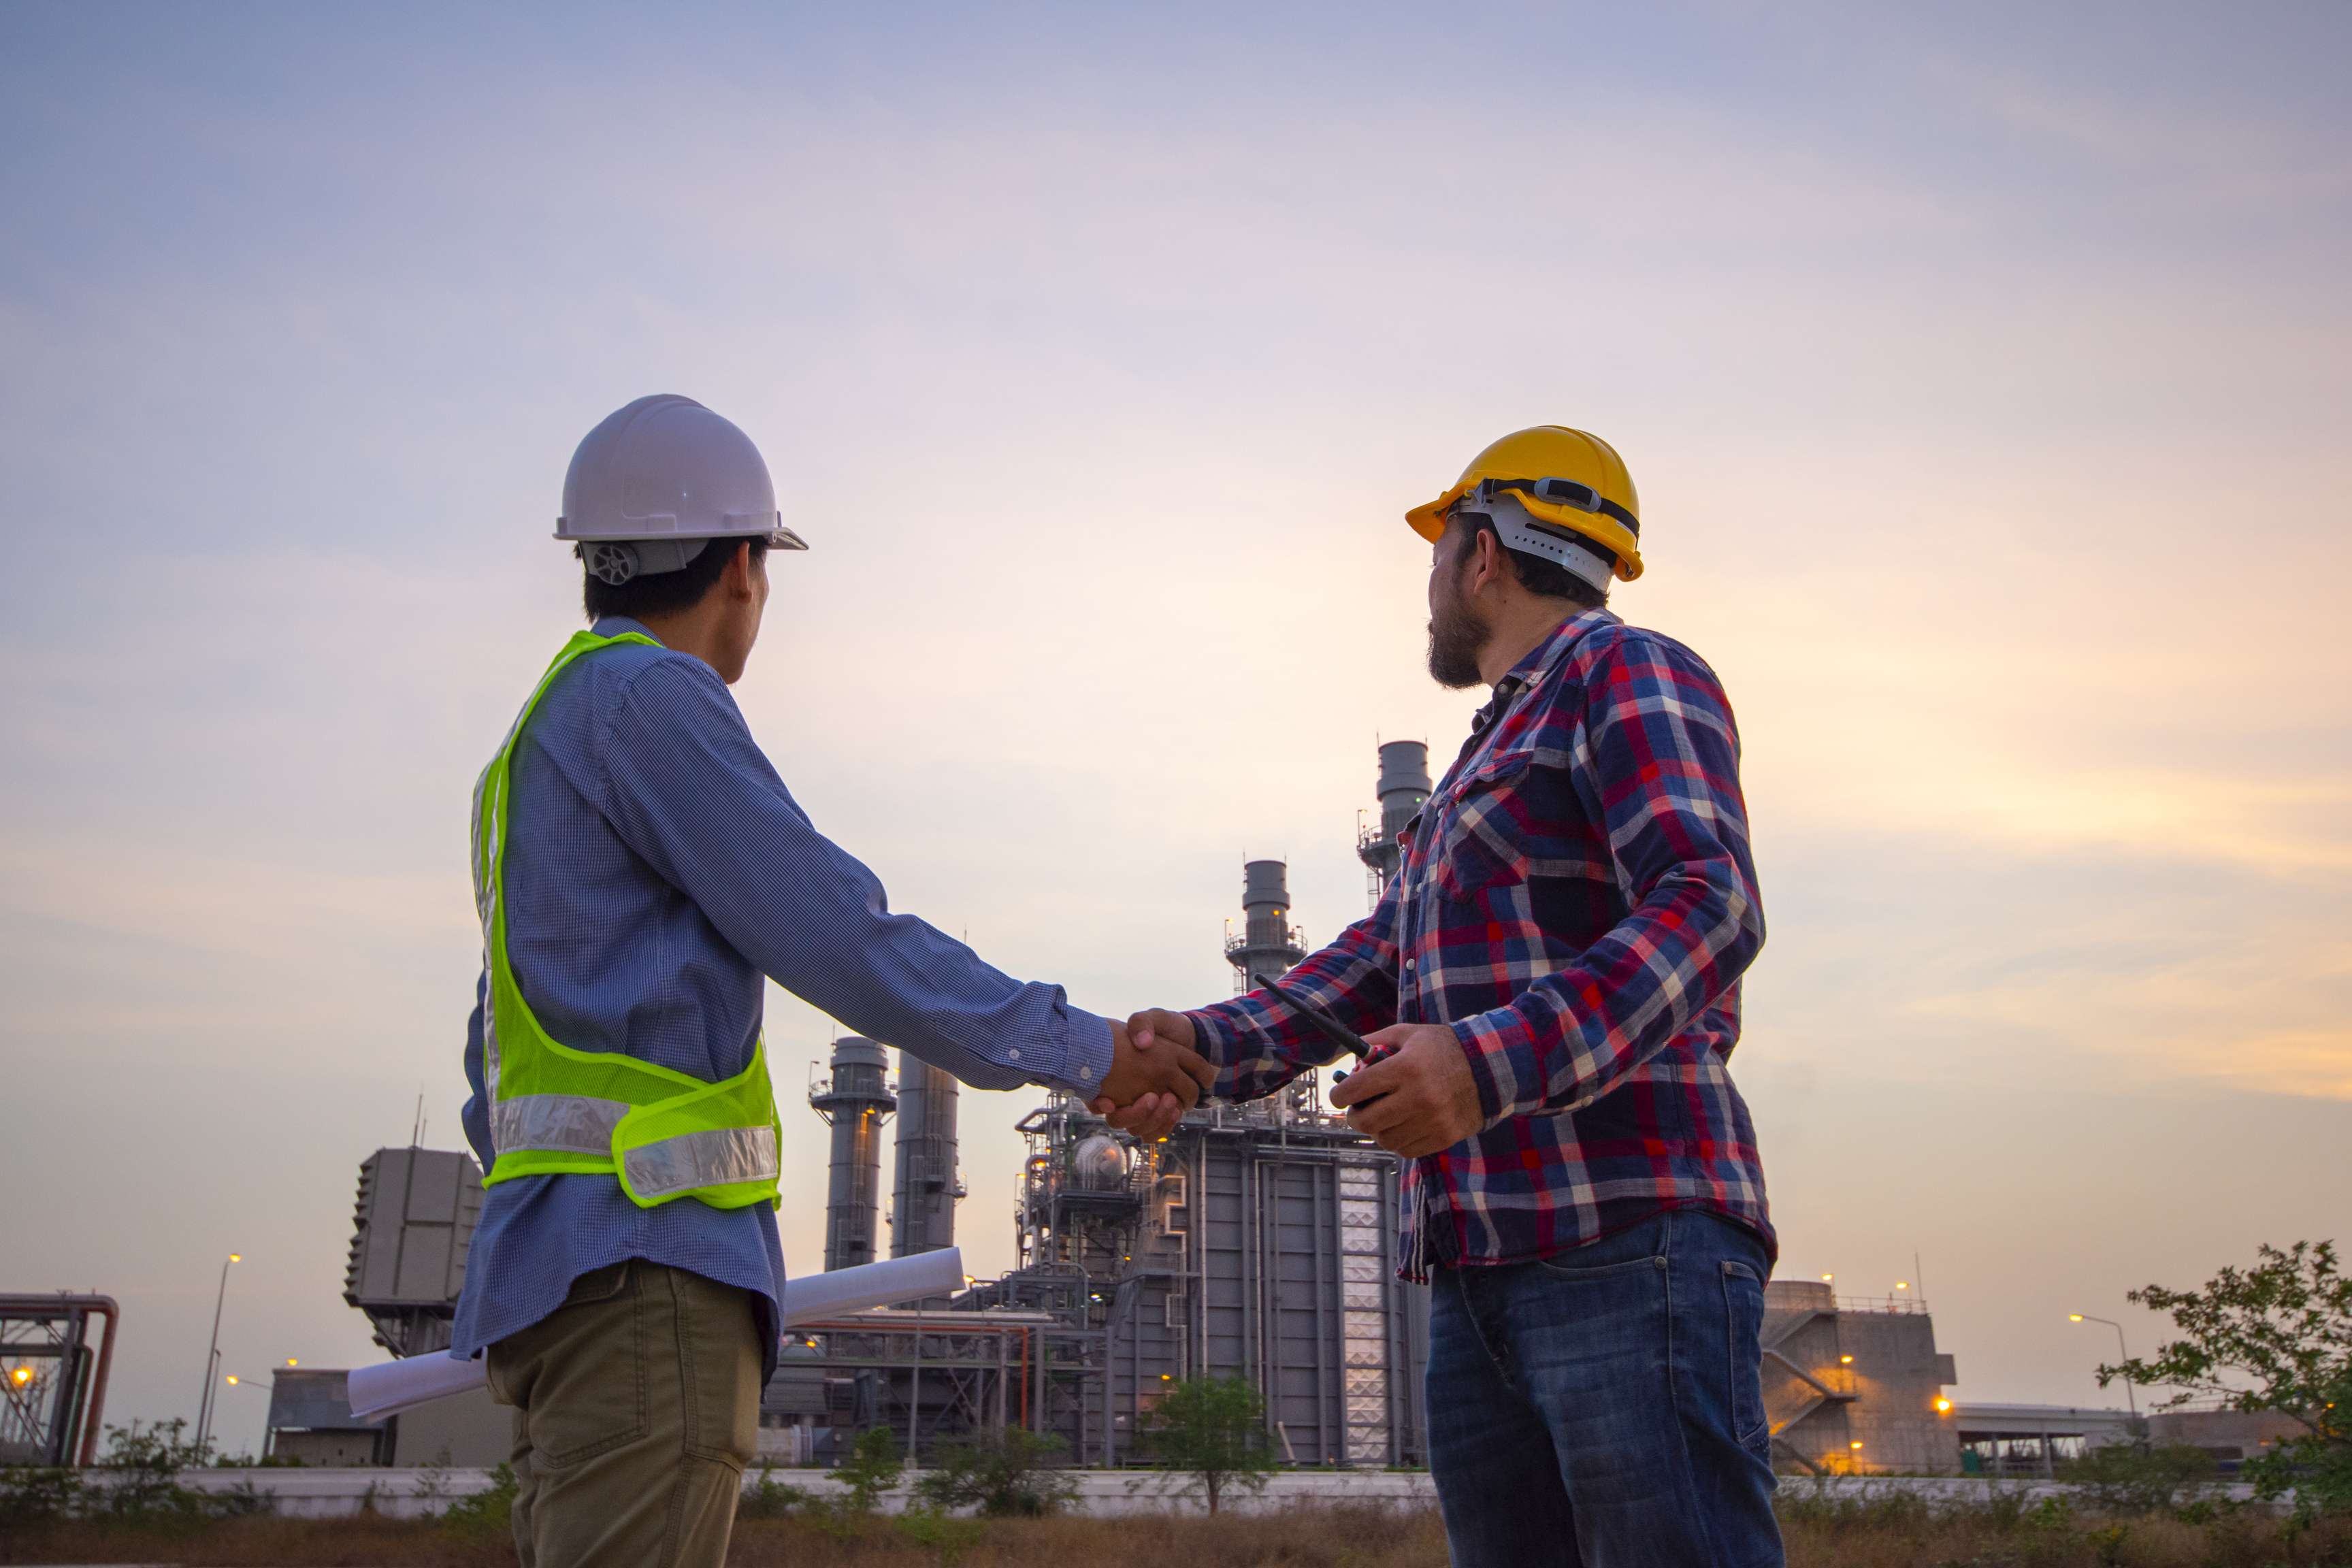 Two men in helmets shake hands in front of a refinery.